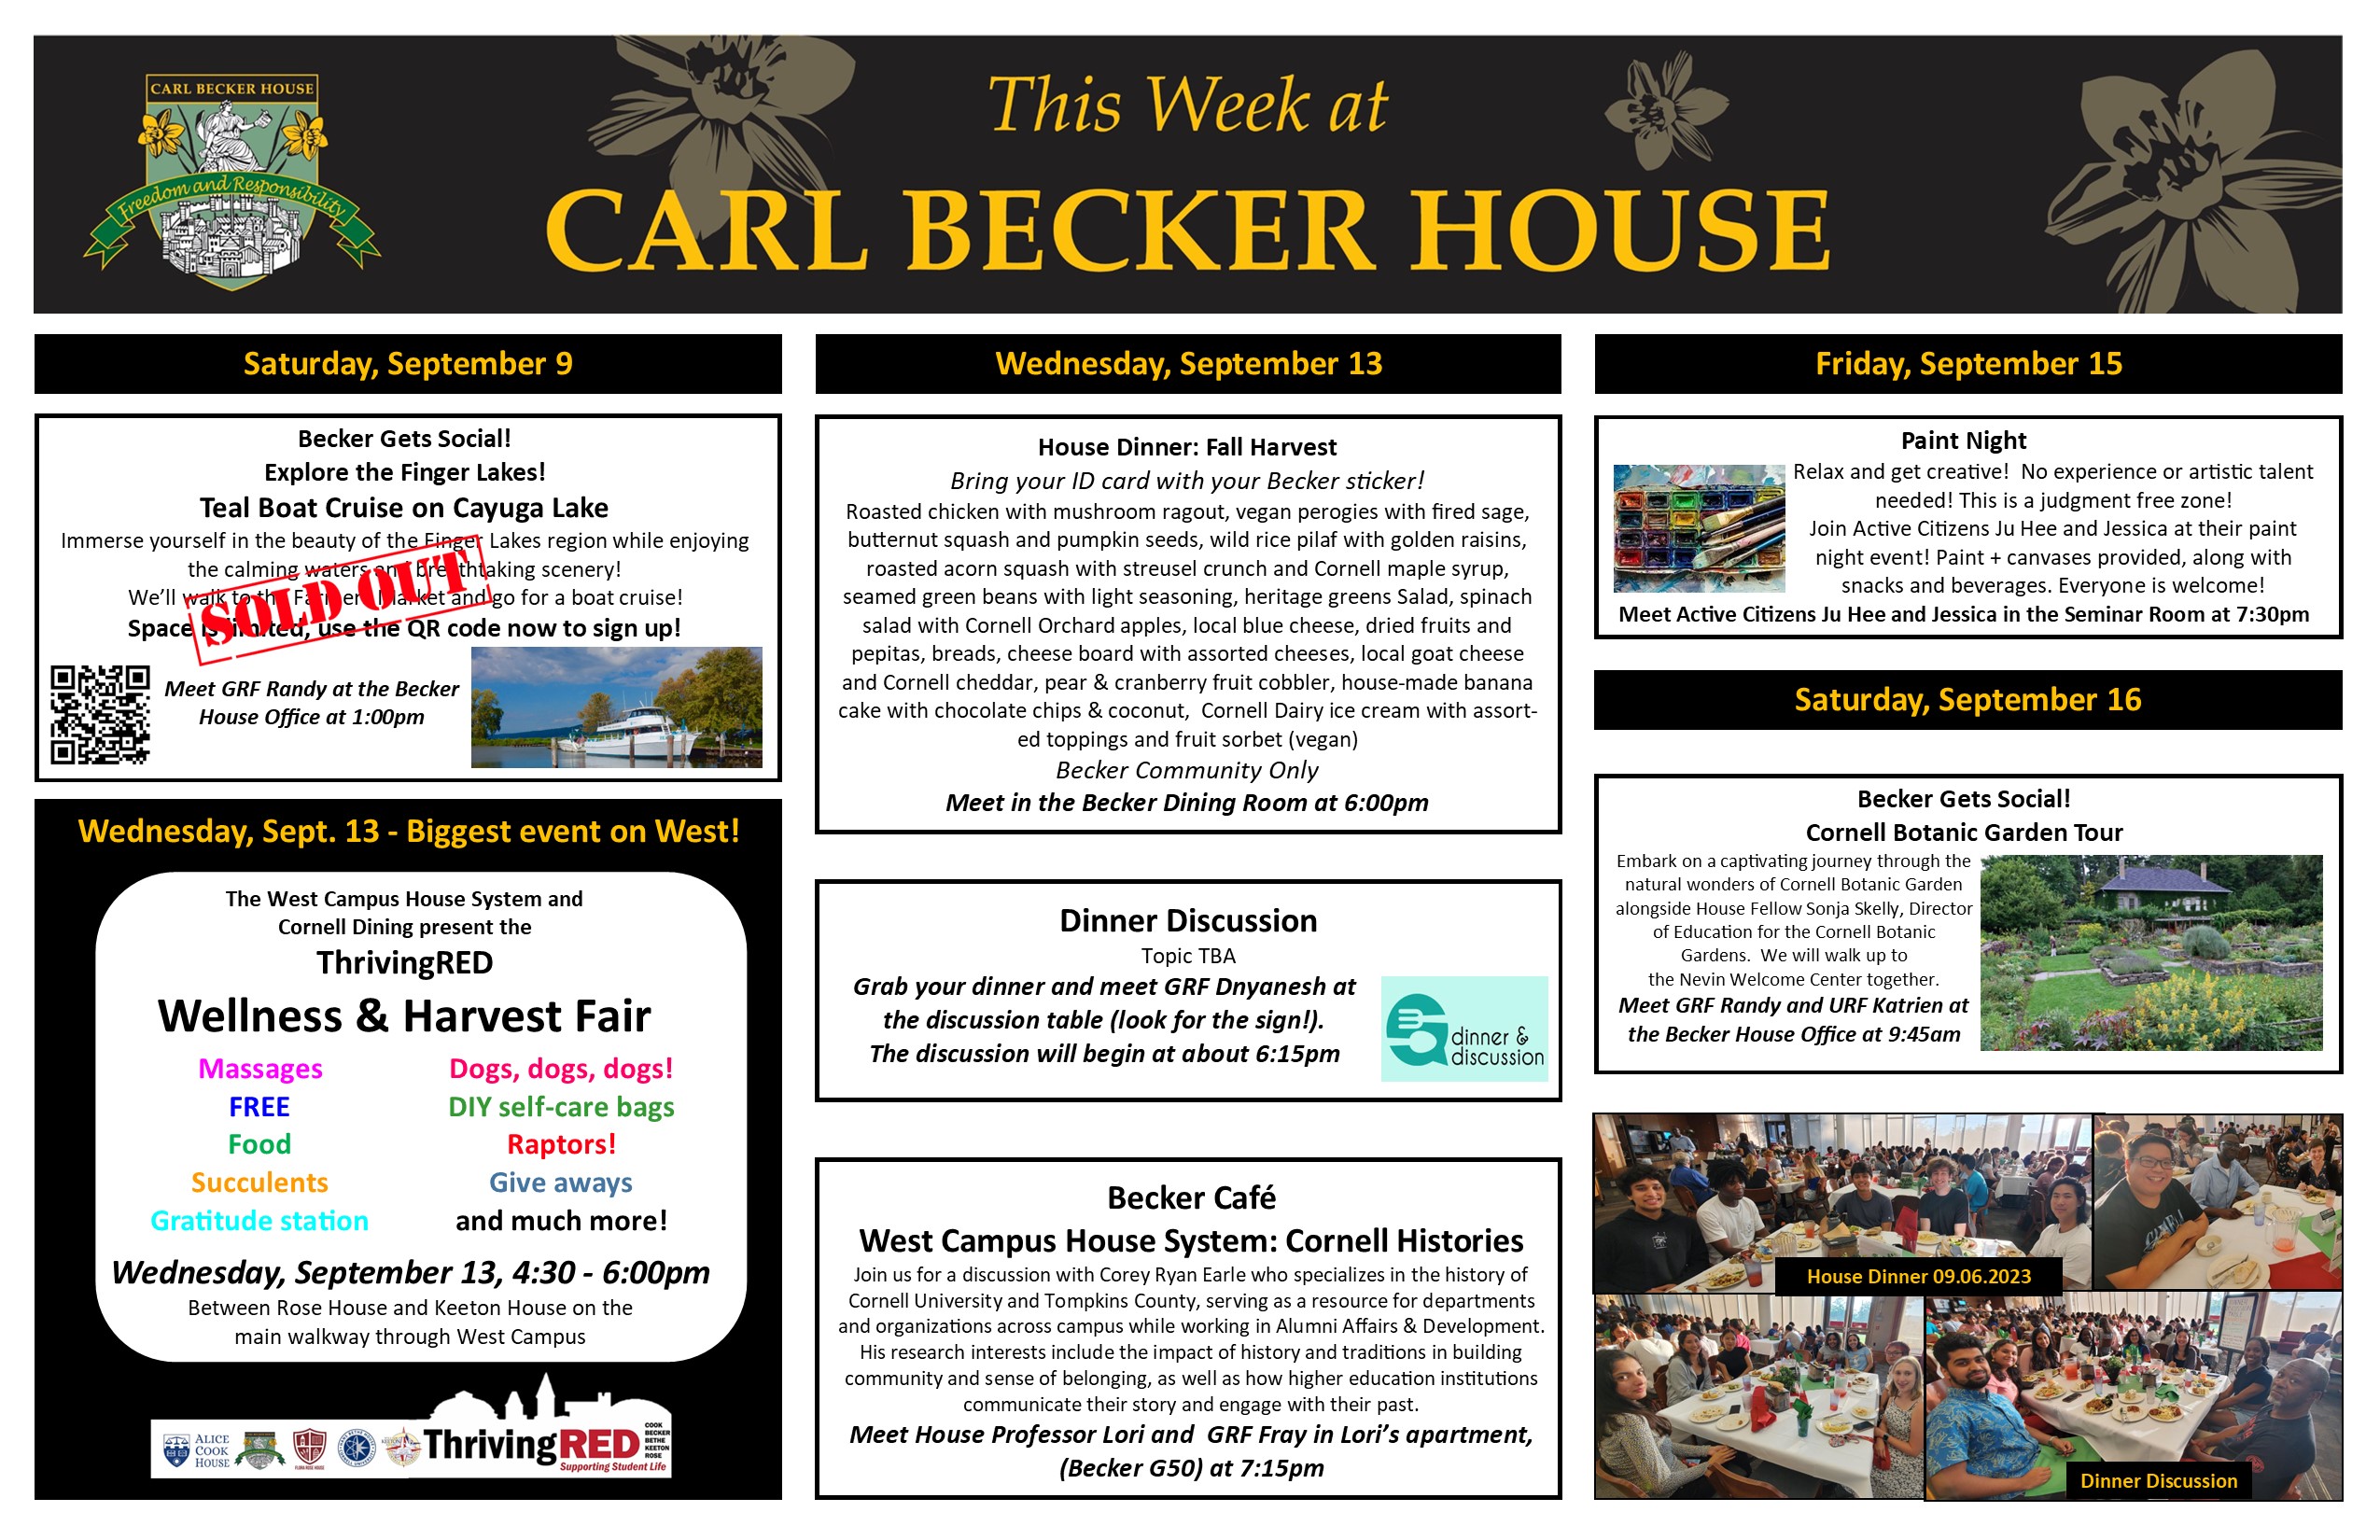 This Week at Carl Becker House Events.  Visit CampusGroups for details.